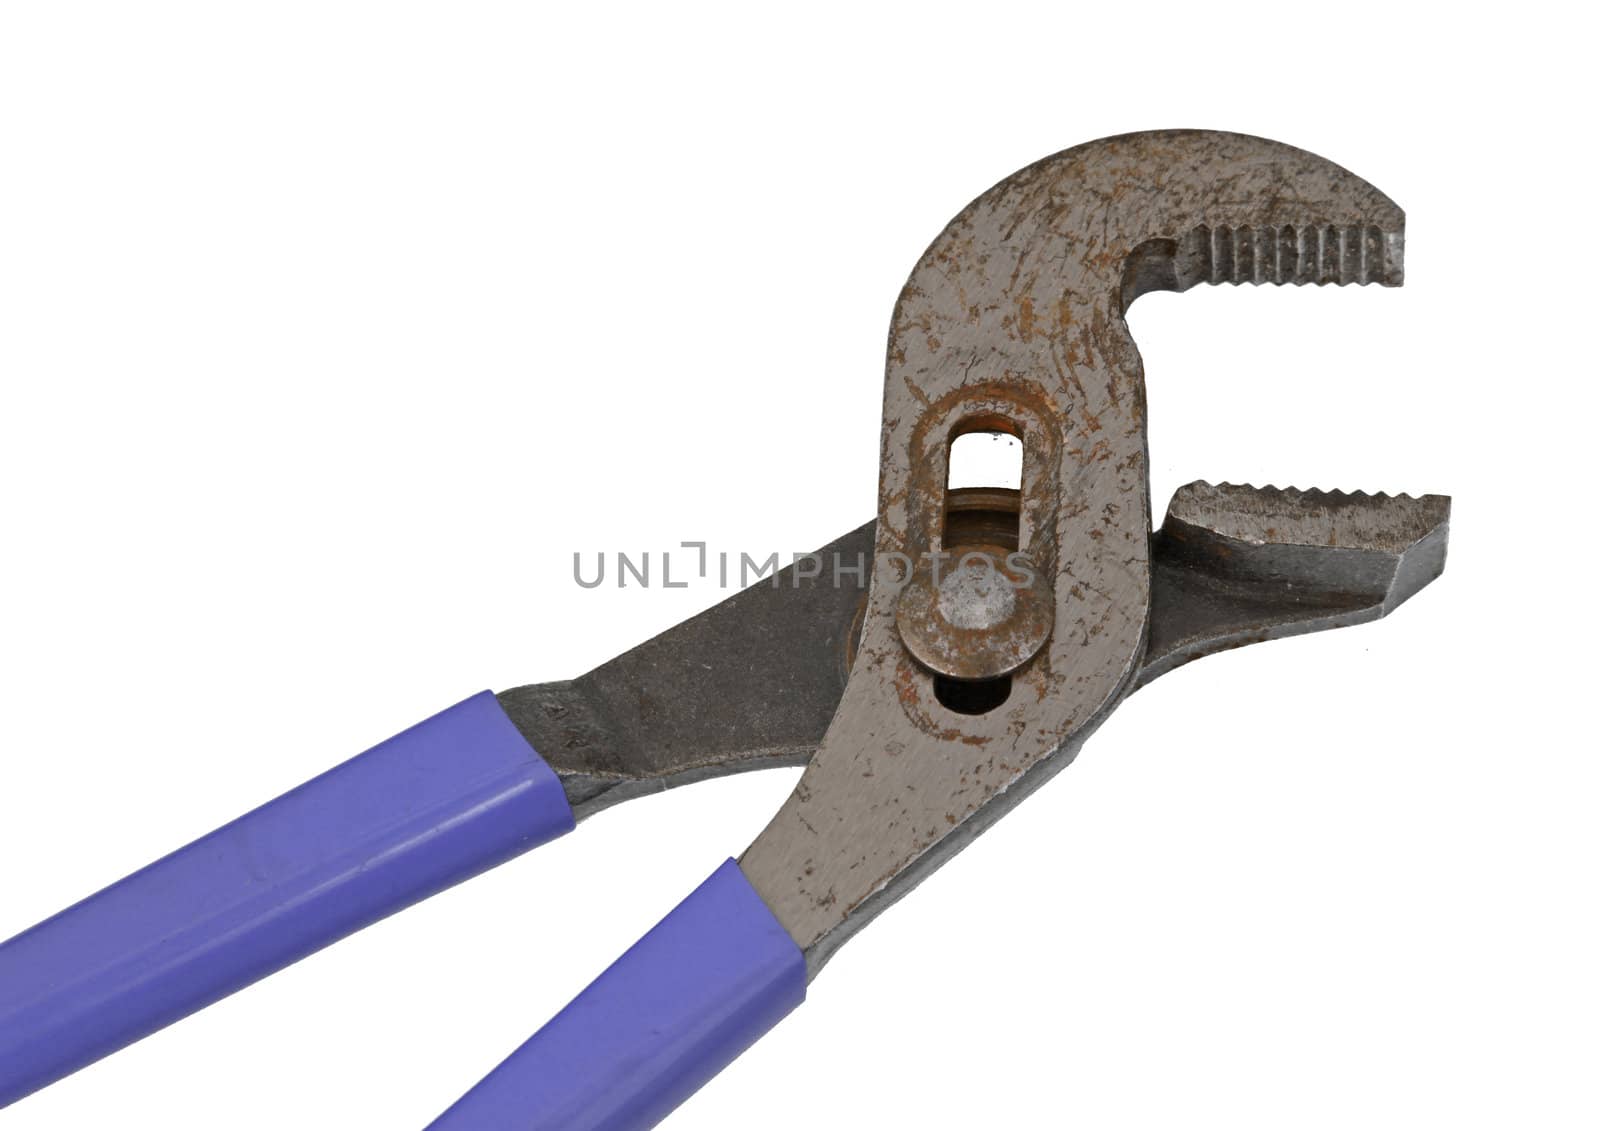 Old adjustable wrench on a plain white background.